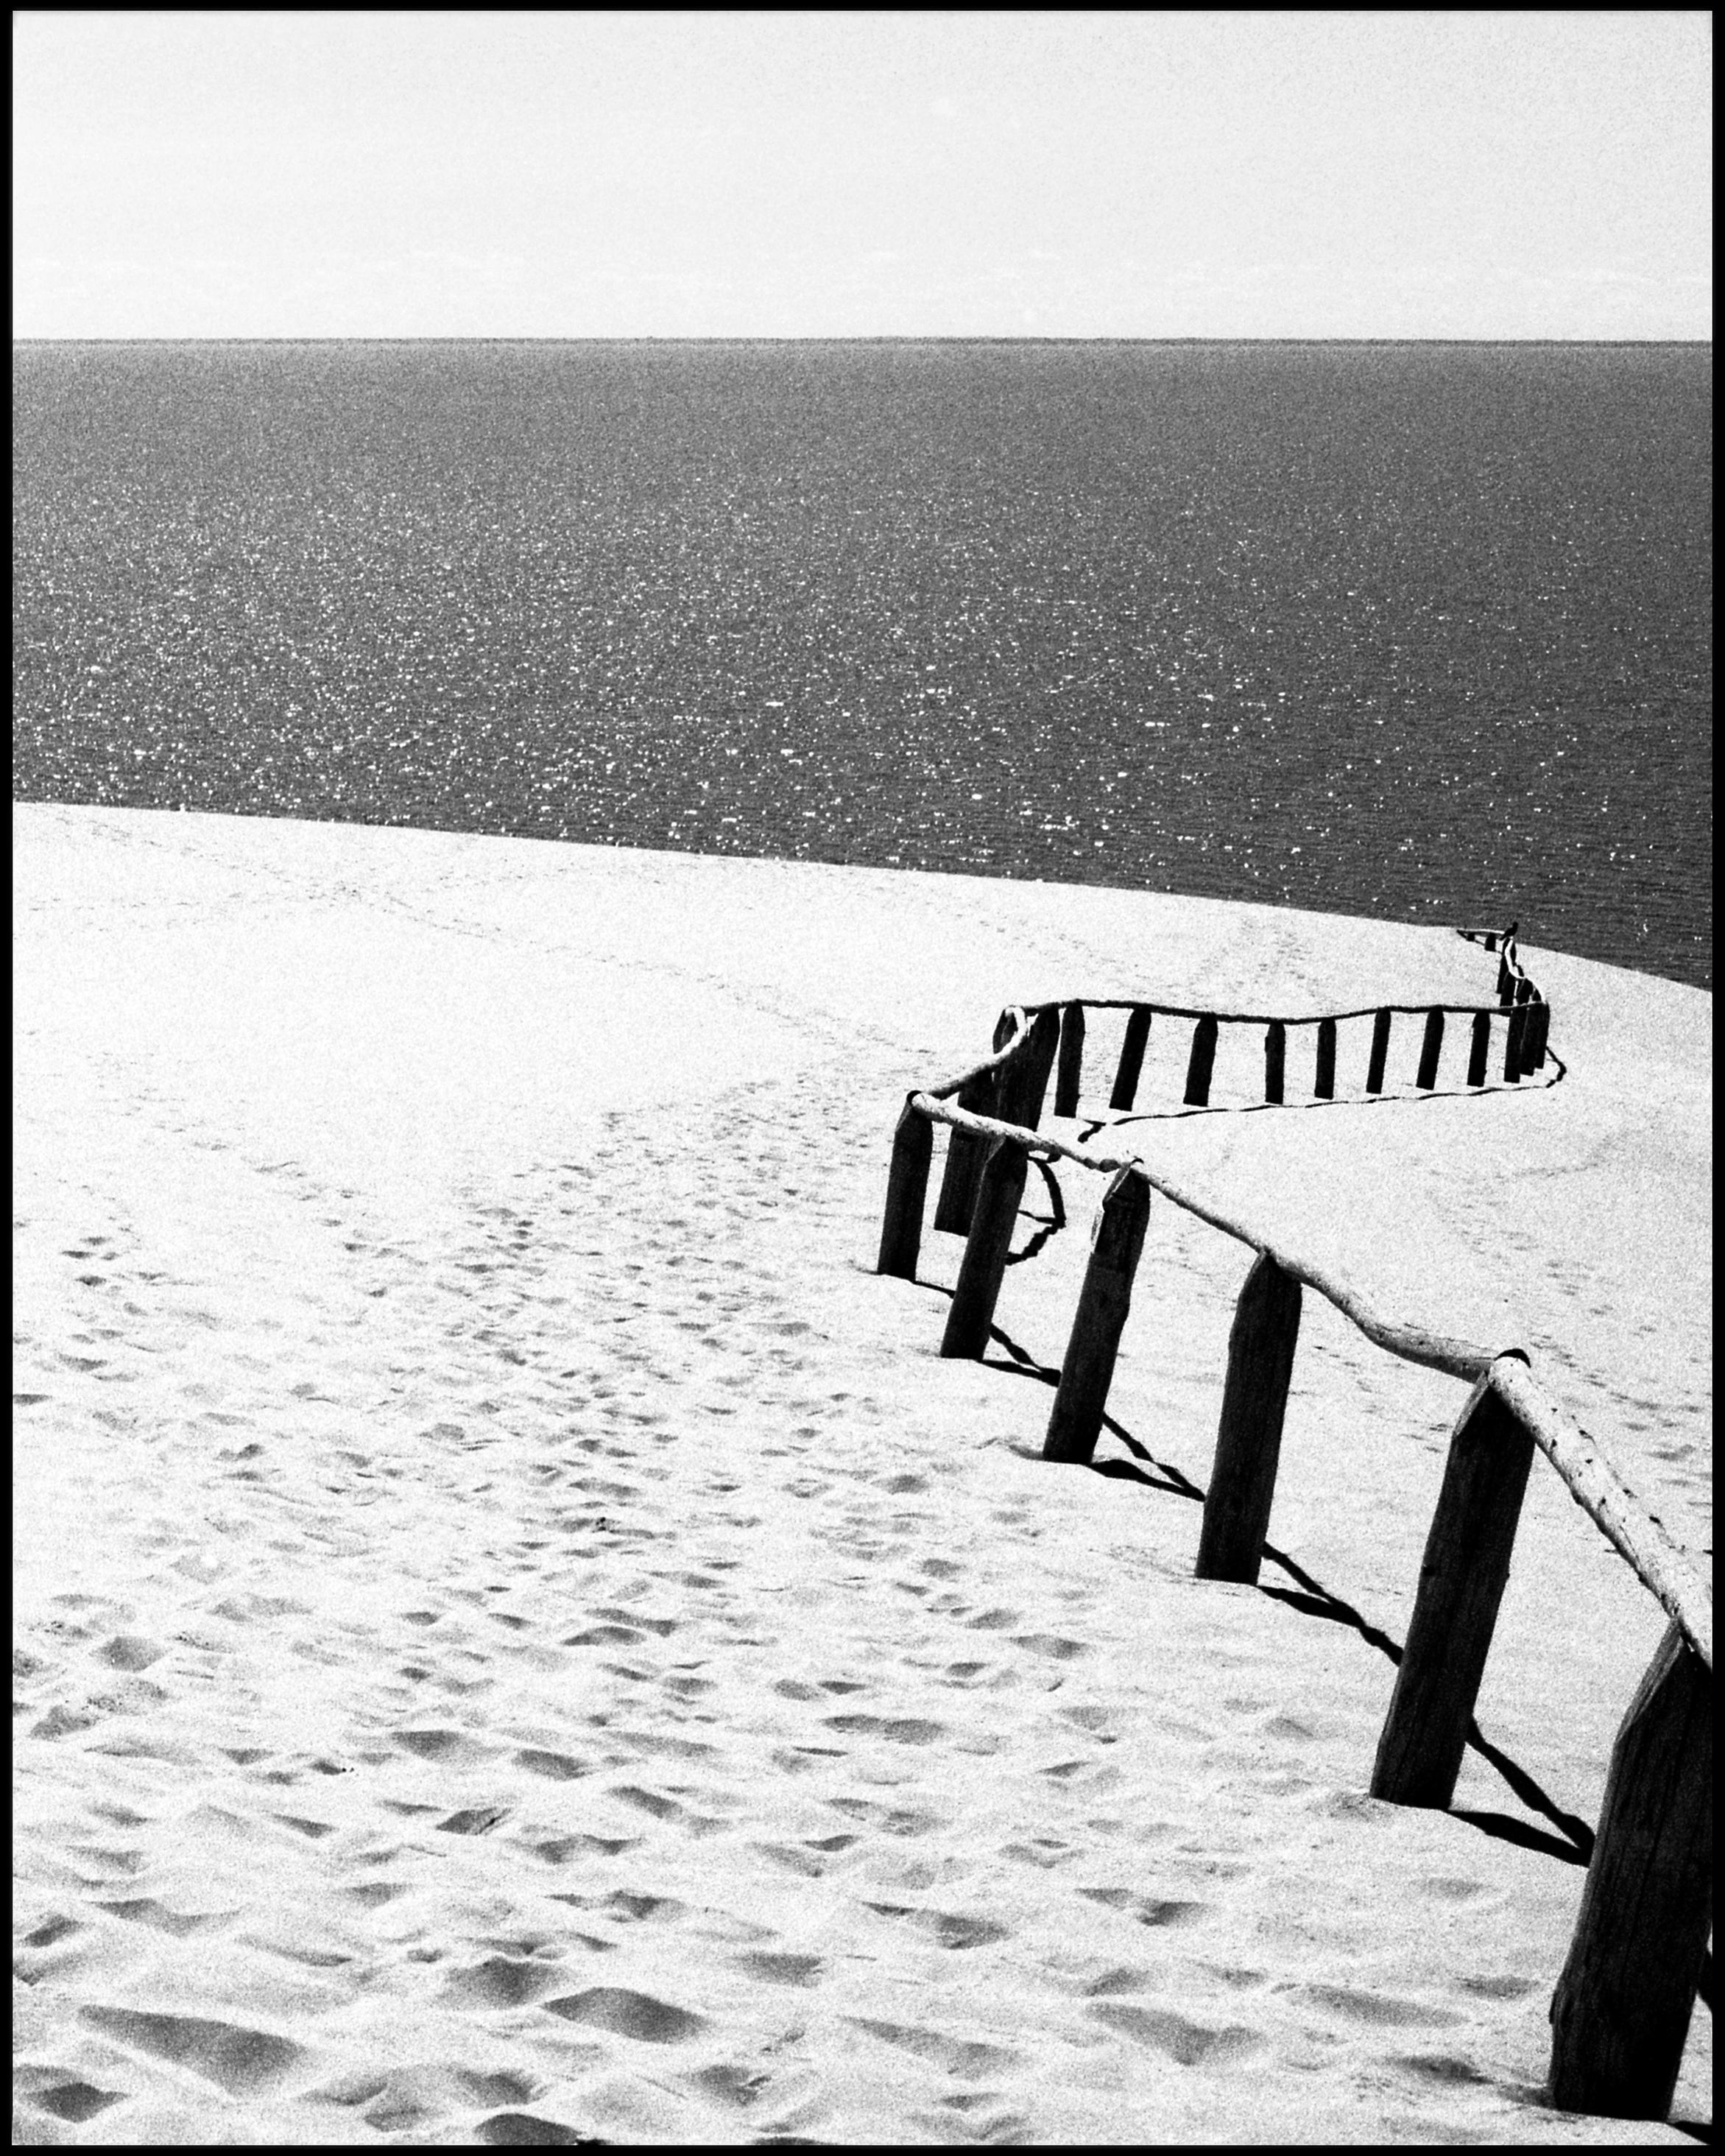 Ugne Pouwell Landscape Photograph - Nida - Black and White Analogue photograph of sand dunes and Baltic sea